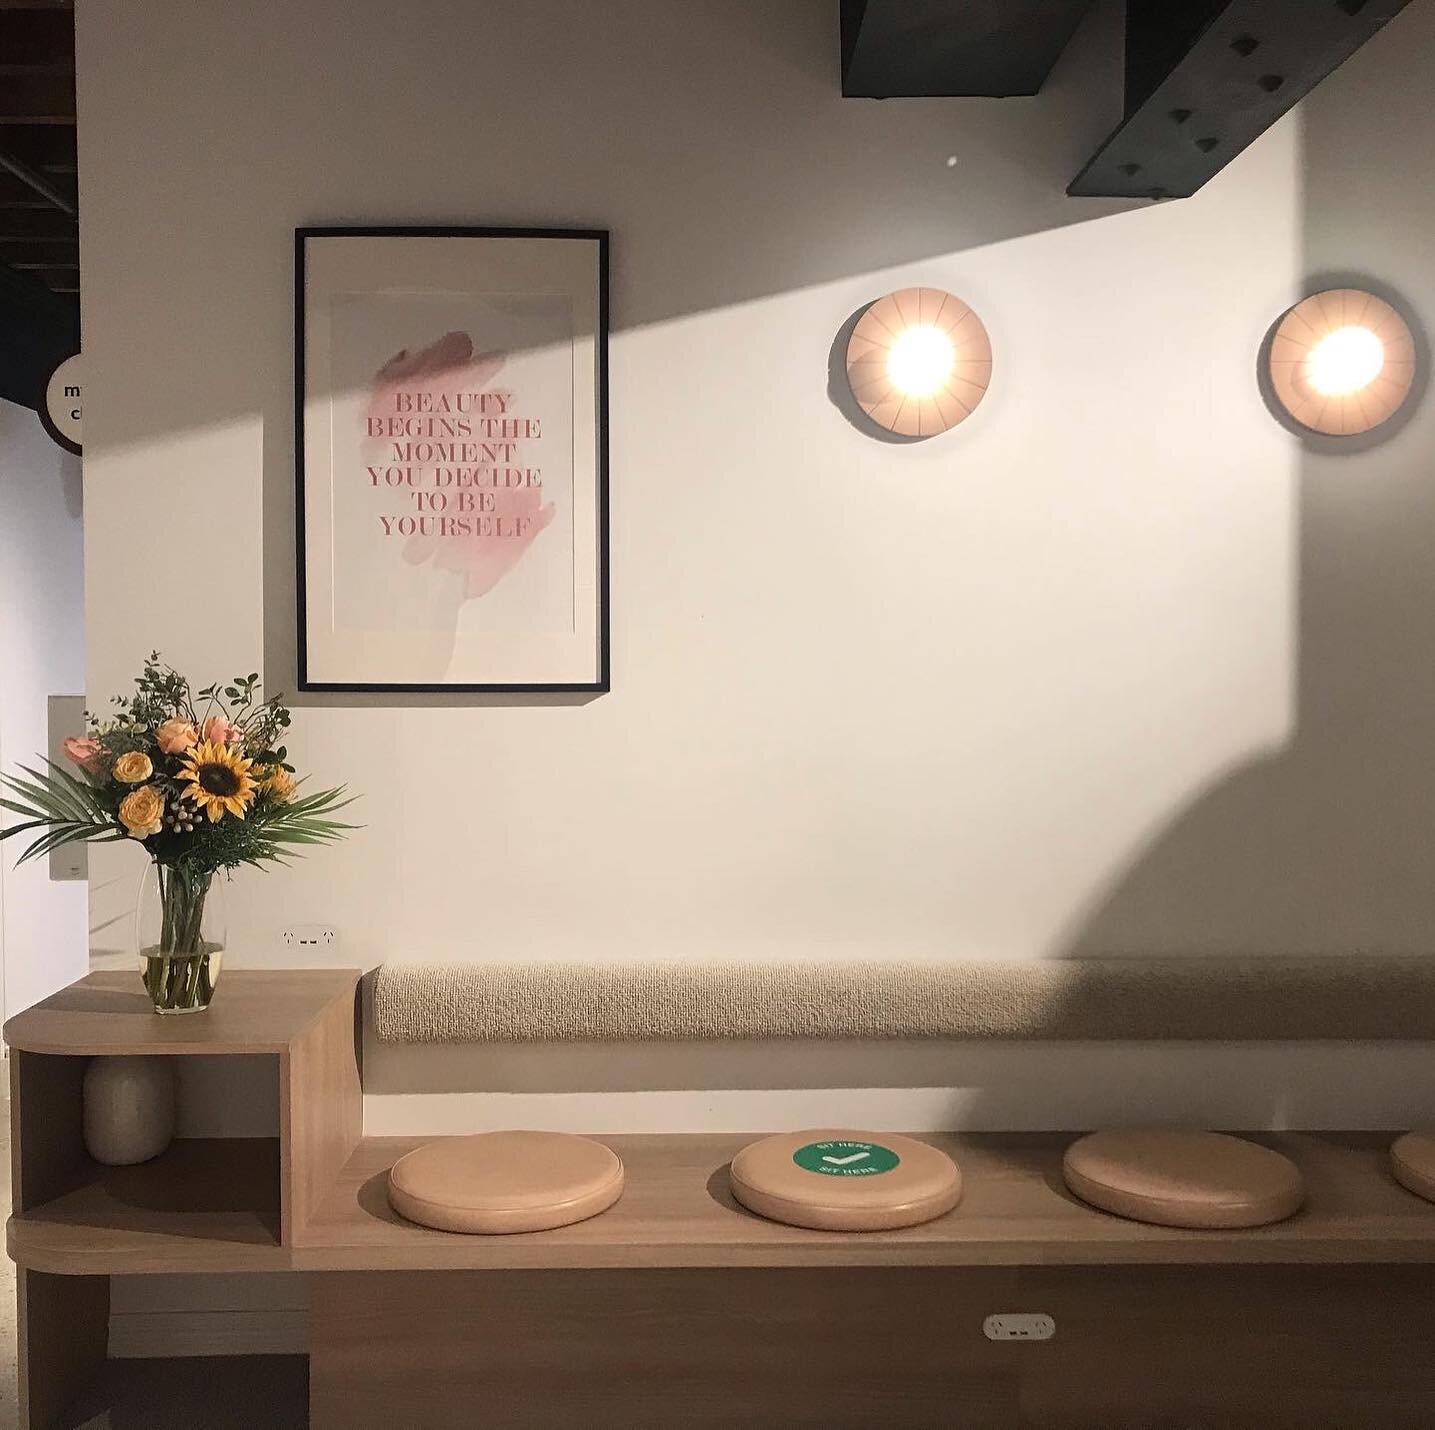 The waiting area for my 💥NEW STUDIO💥@salon.lane 🤗

From this Friday onwards I will be here every week Tuesday thru Saturday 🥳

Book now via the link in my bio! X 

#acupuncturesydney #sydneyacupuncture  #sydneywellness #cosmeticacupuncturesydney 